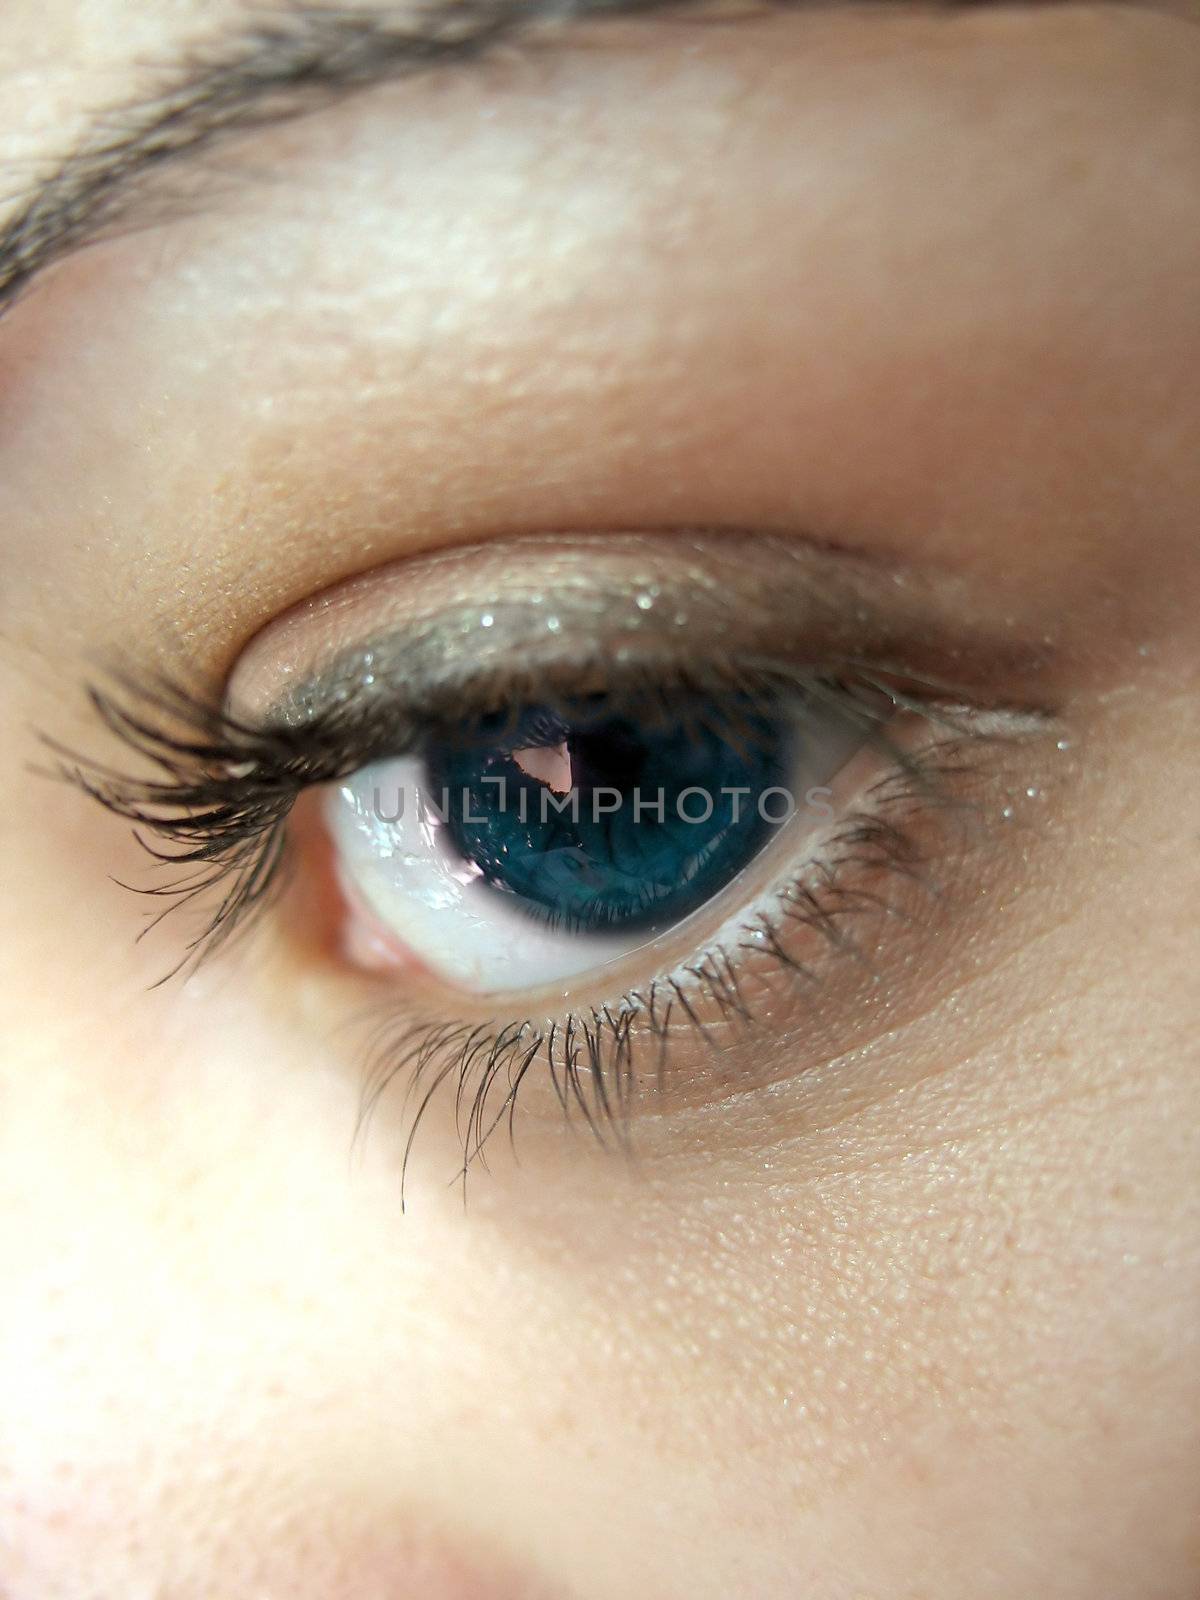 A macro shot of a pretty woman's blue eye and lashes - shallow depth of field.